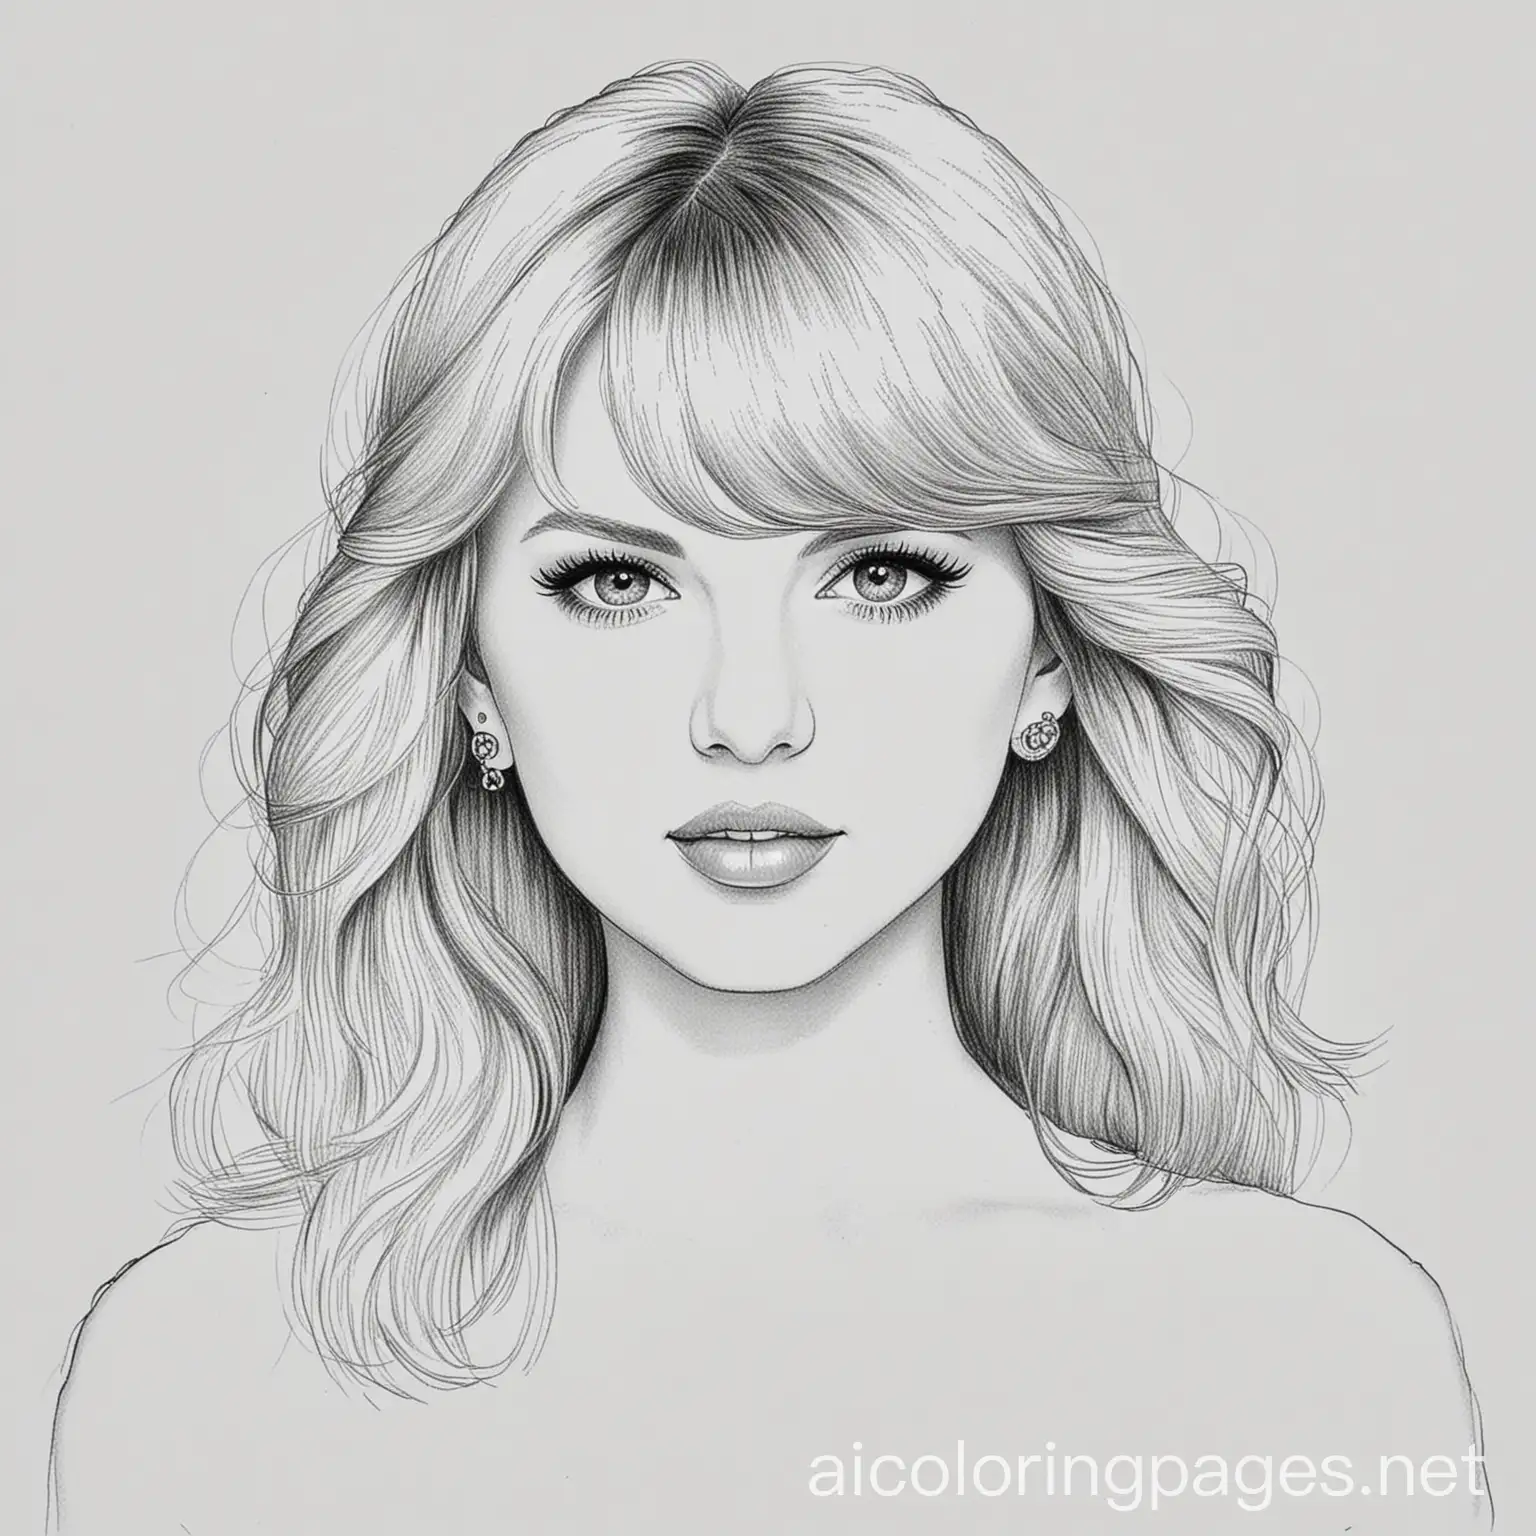 Taylor-Swift-Coloring-Page-for-Kids-Simple-Line-Art-on-White-Background